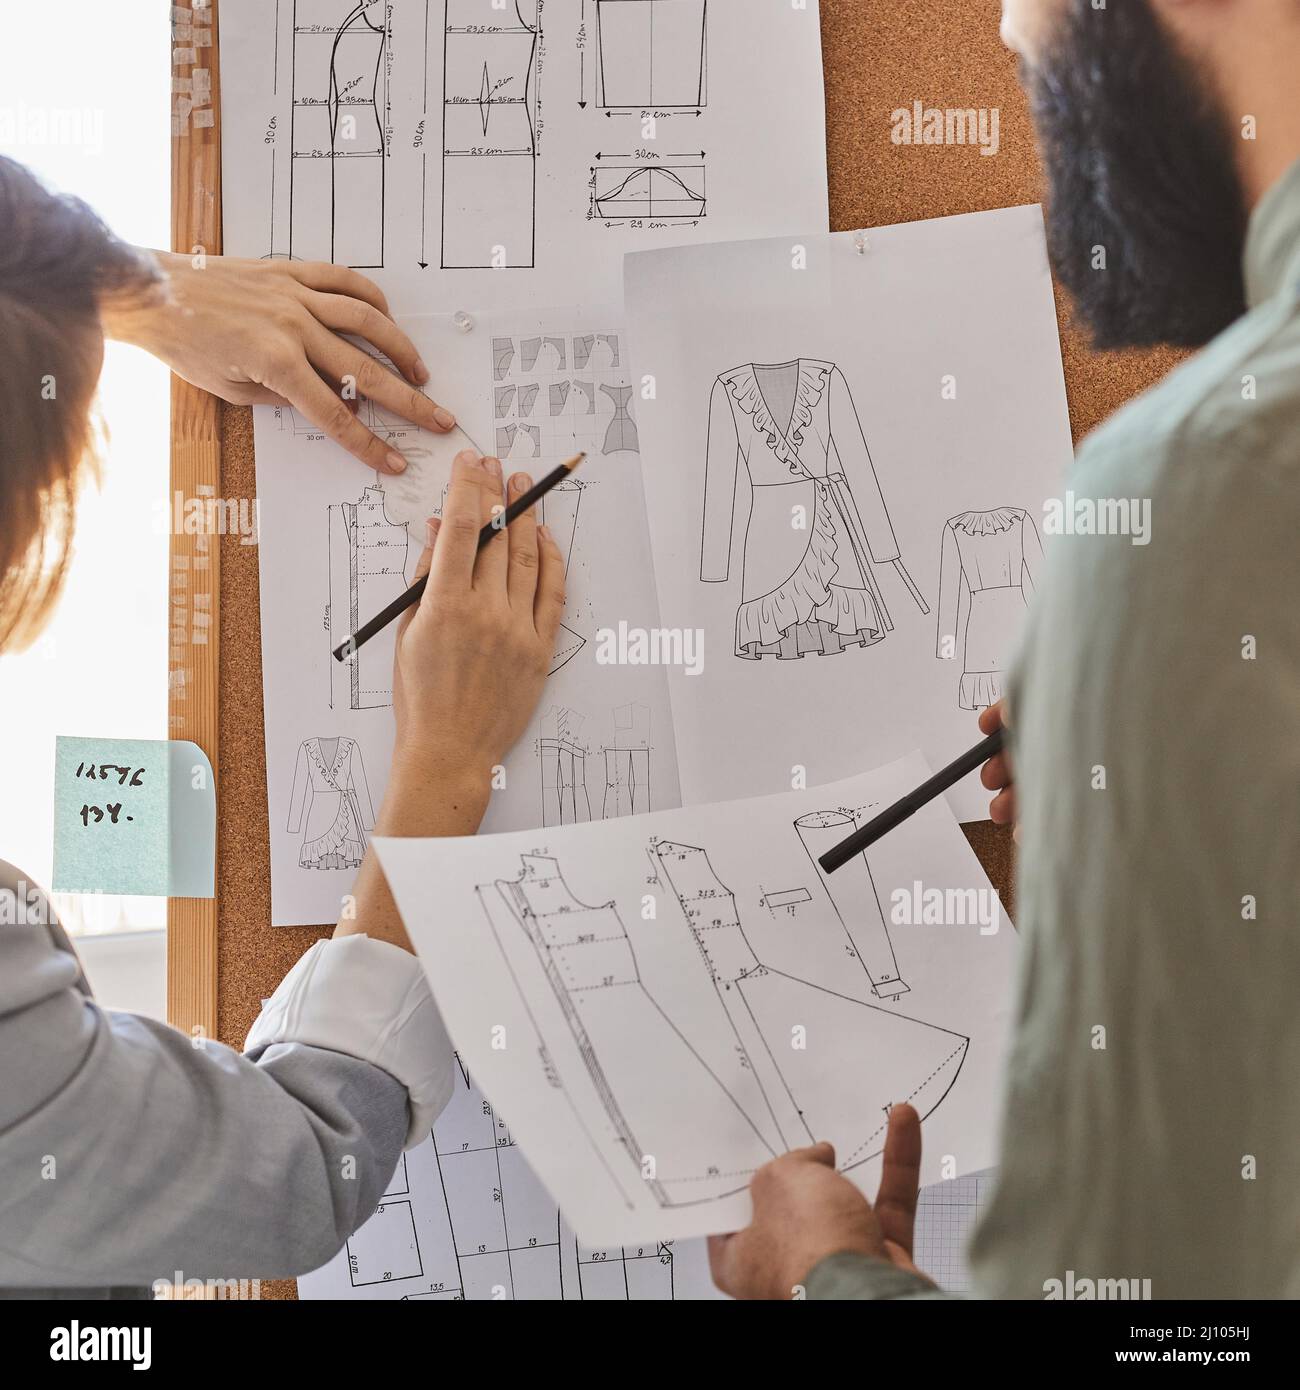 Fashion designers consulting plans new clothing line idea board Stock Photo